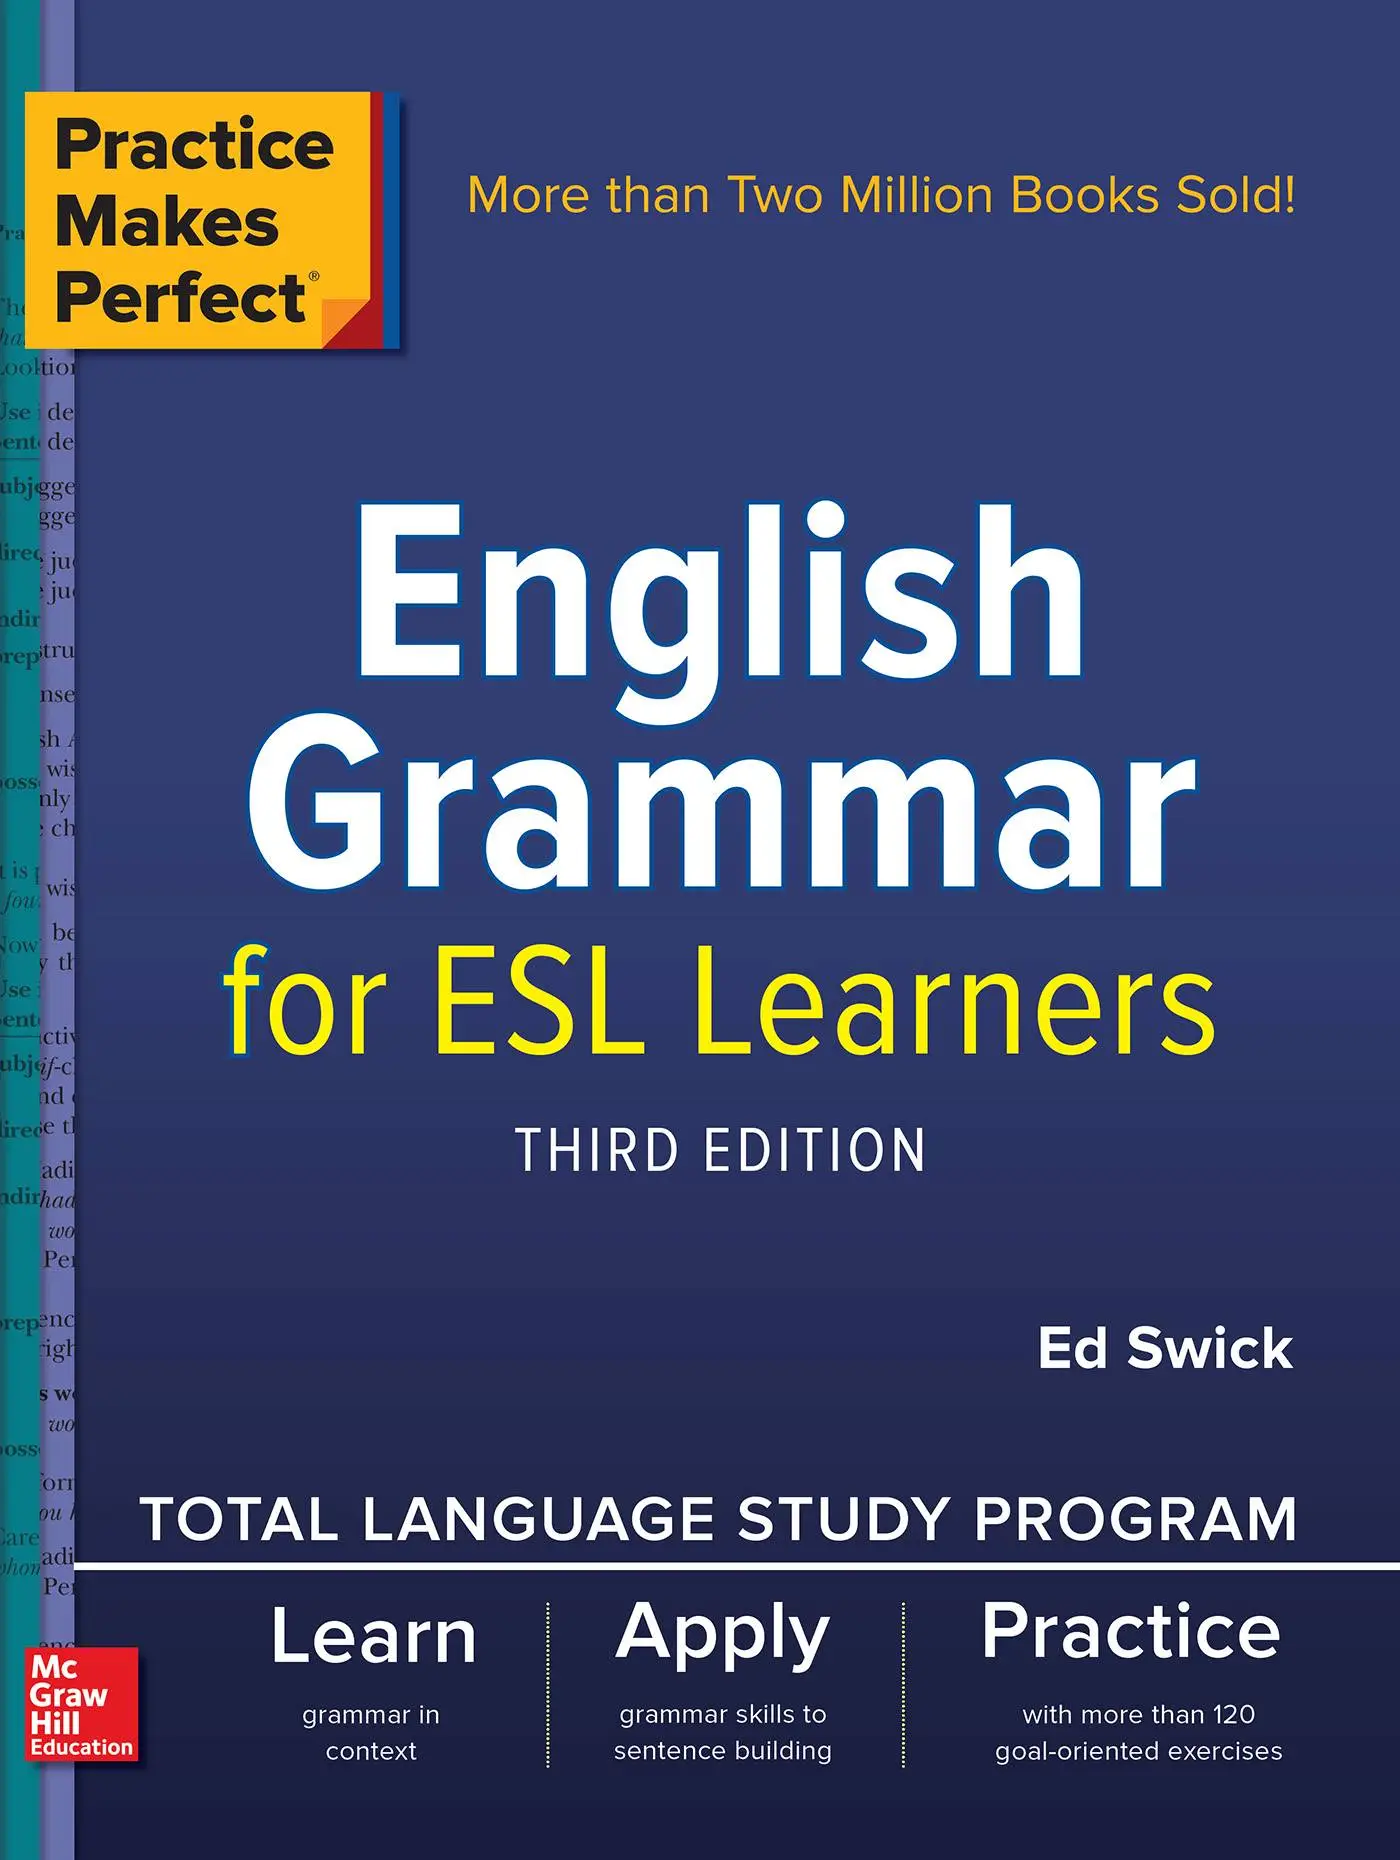 practice-makes-perfect-english-grammar-for-esl-learners-3rd-edition-avaxhome